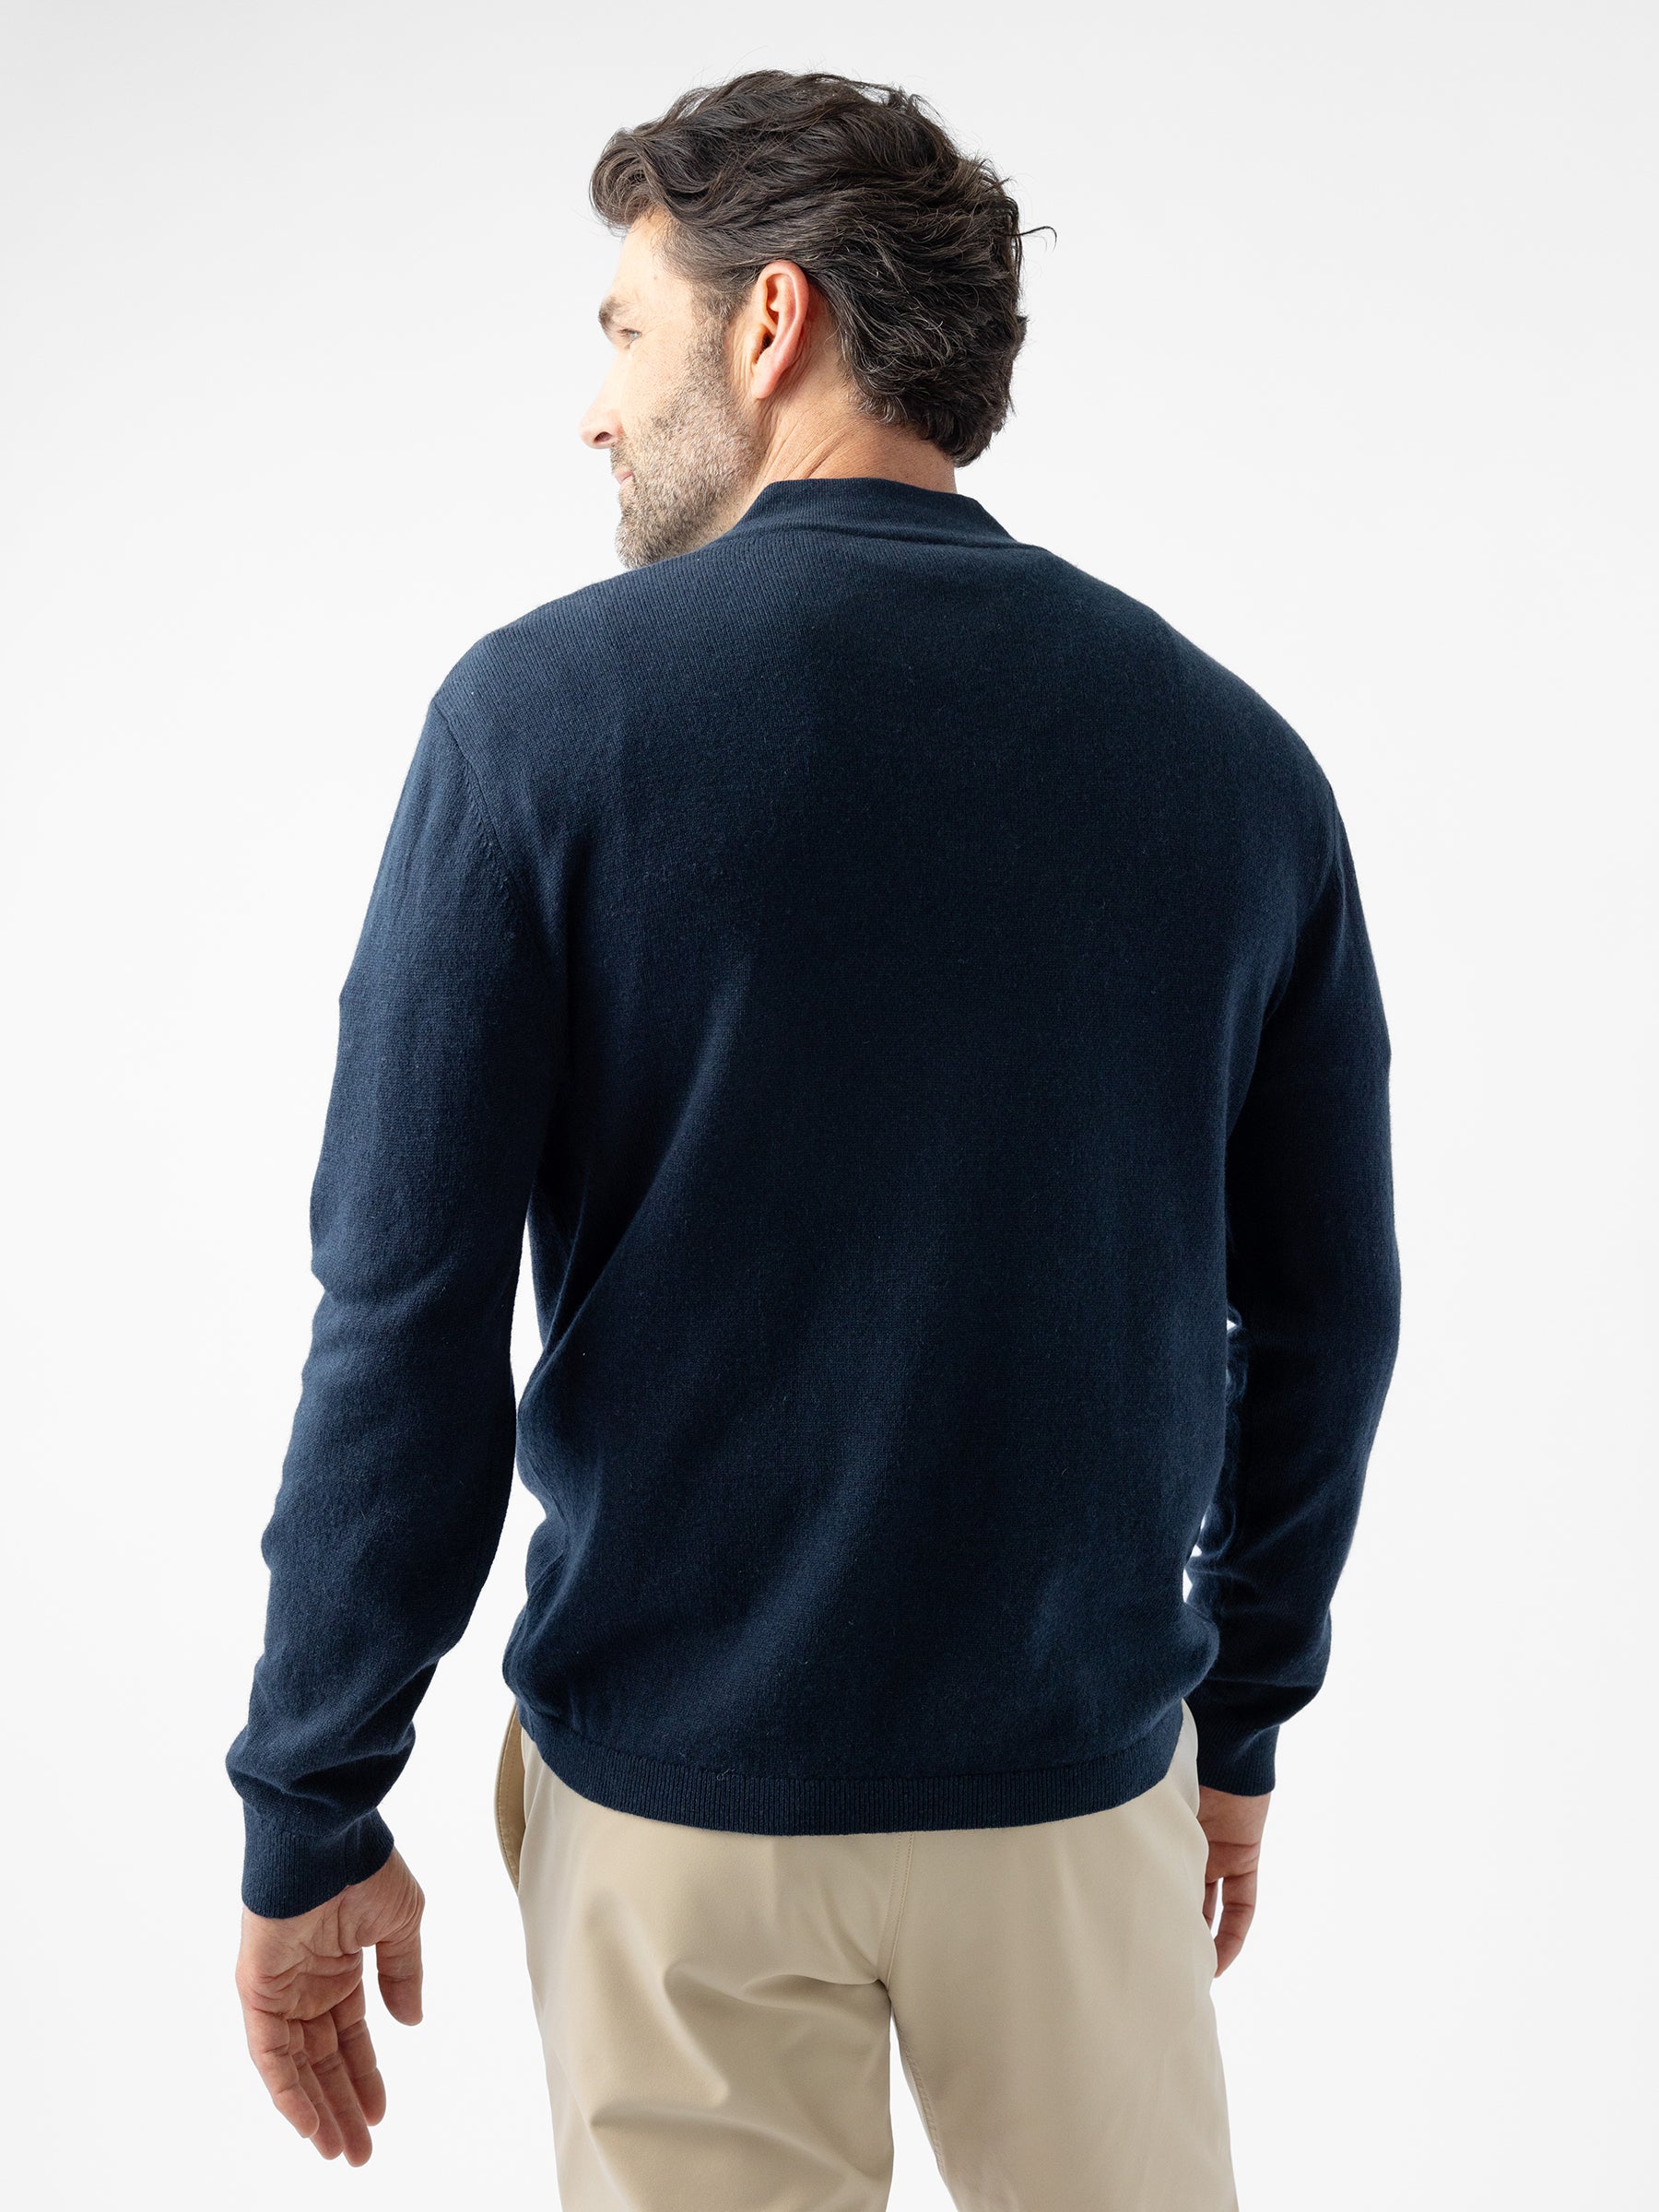 A man with dark hair and a beard is facing away from the camera, wearing a Cozy Earth Men's Quarter Zip Sweater in dark navy-blue and beige pants. The background is plain white. |Color:Eclipse